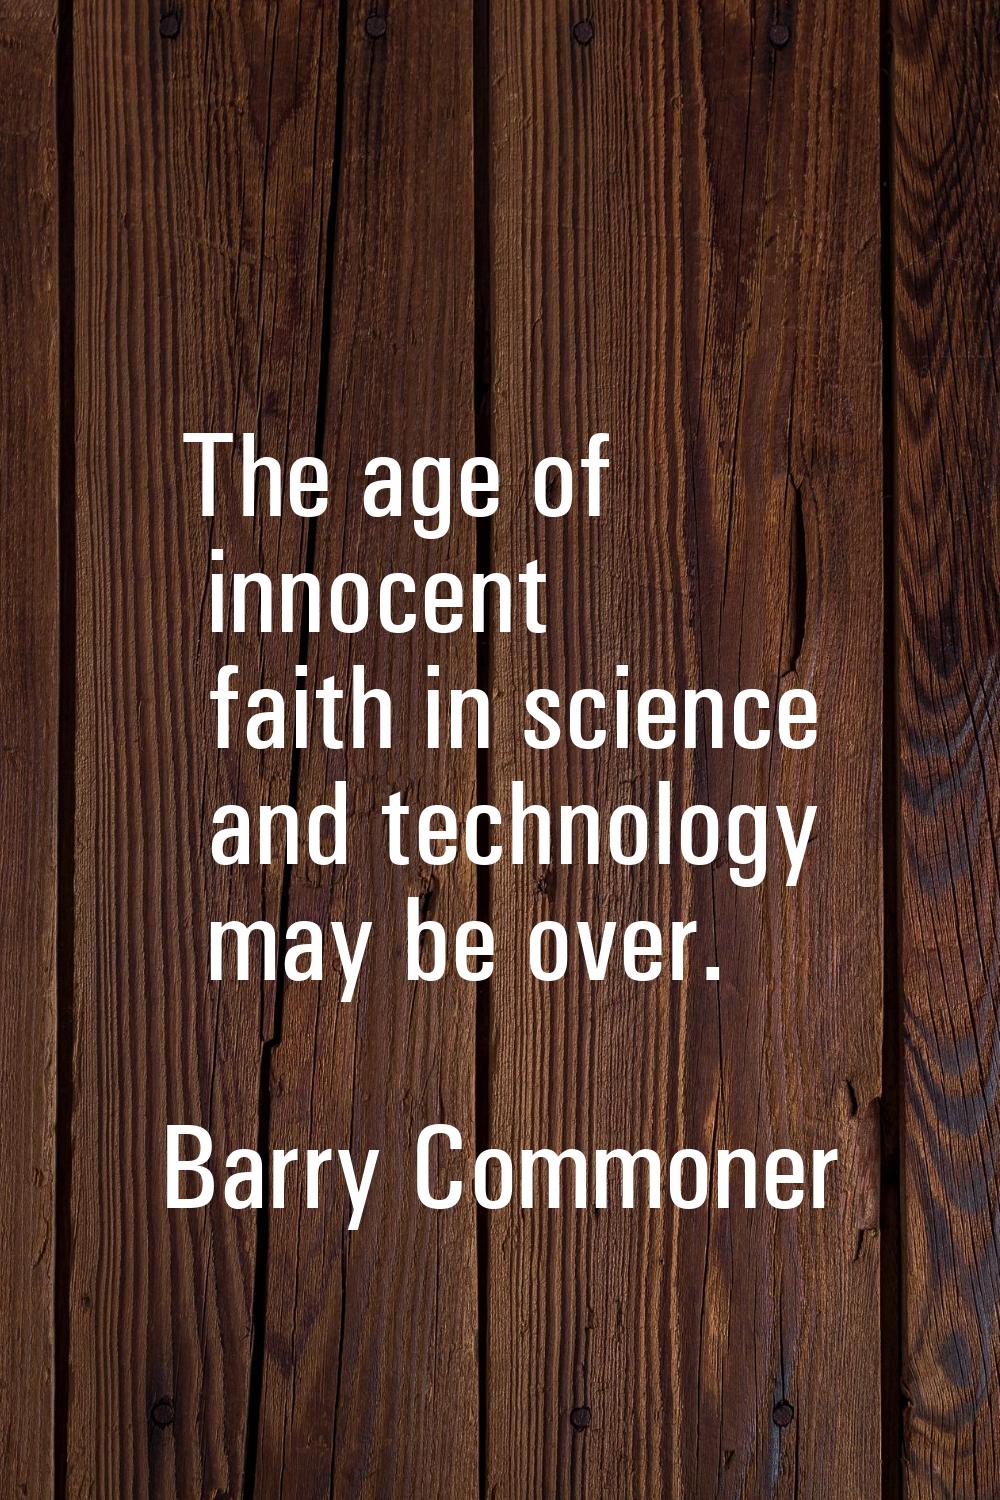 The age of innocent faith in science and technology may be over.